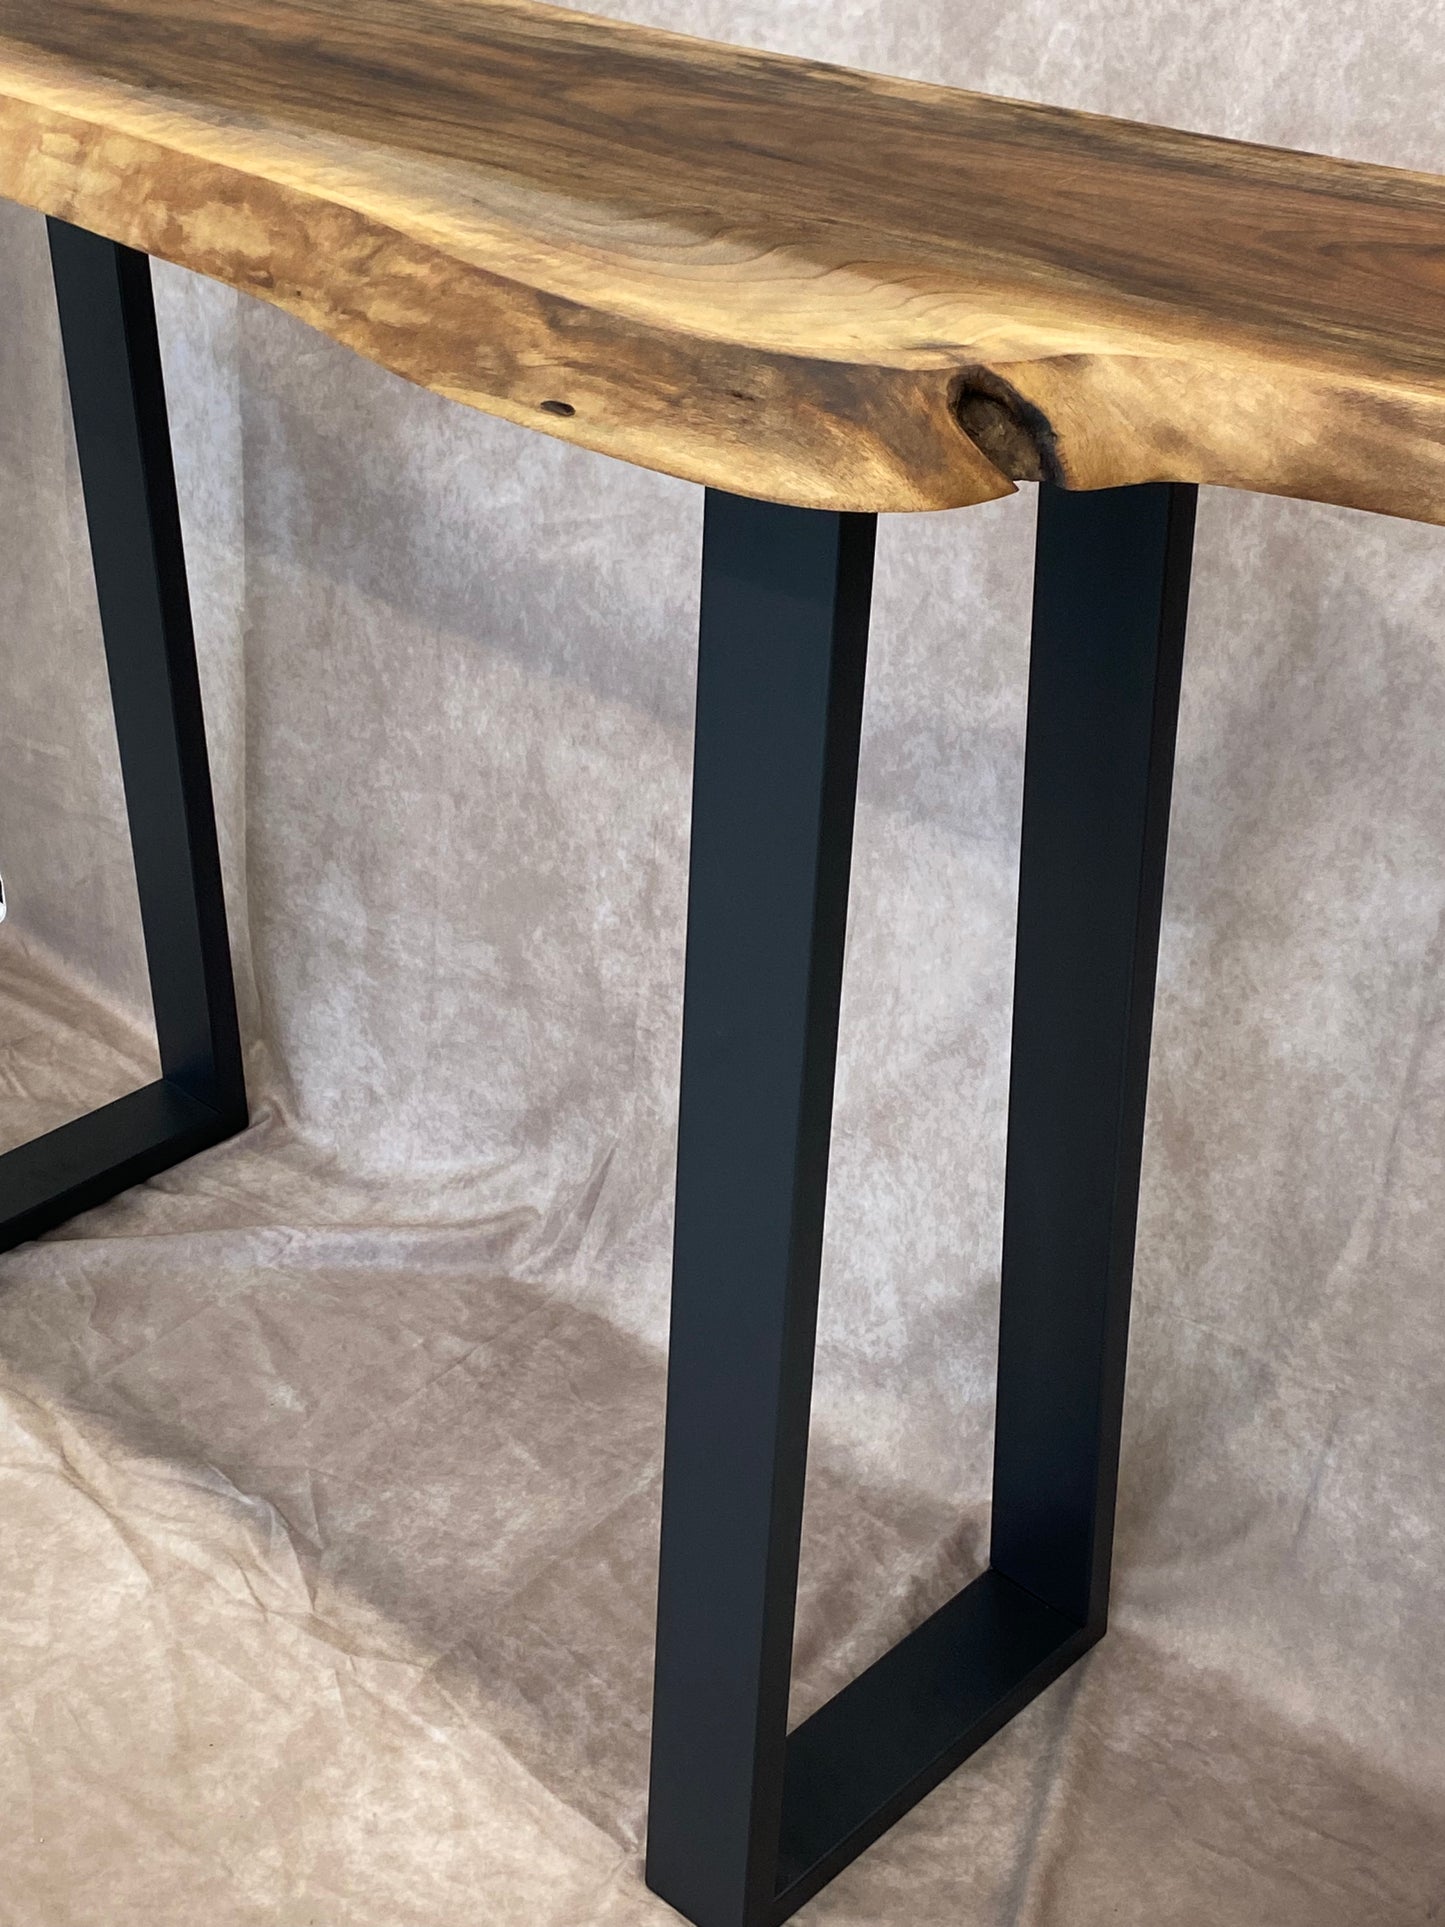 COUNTER TABLE Legs - Trapezoid Shape - Pair